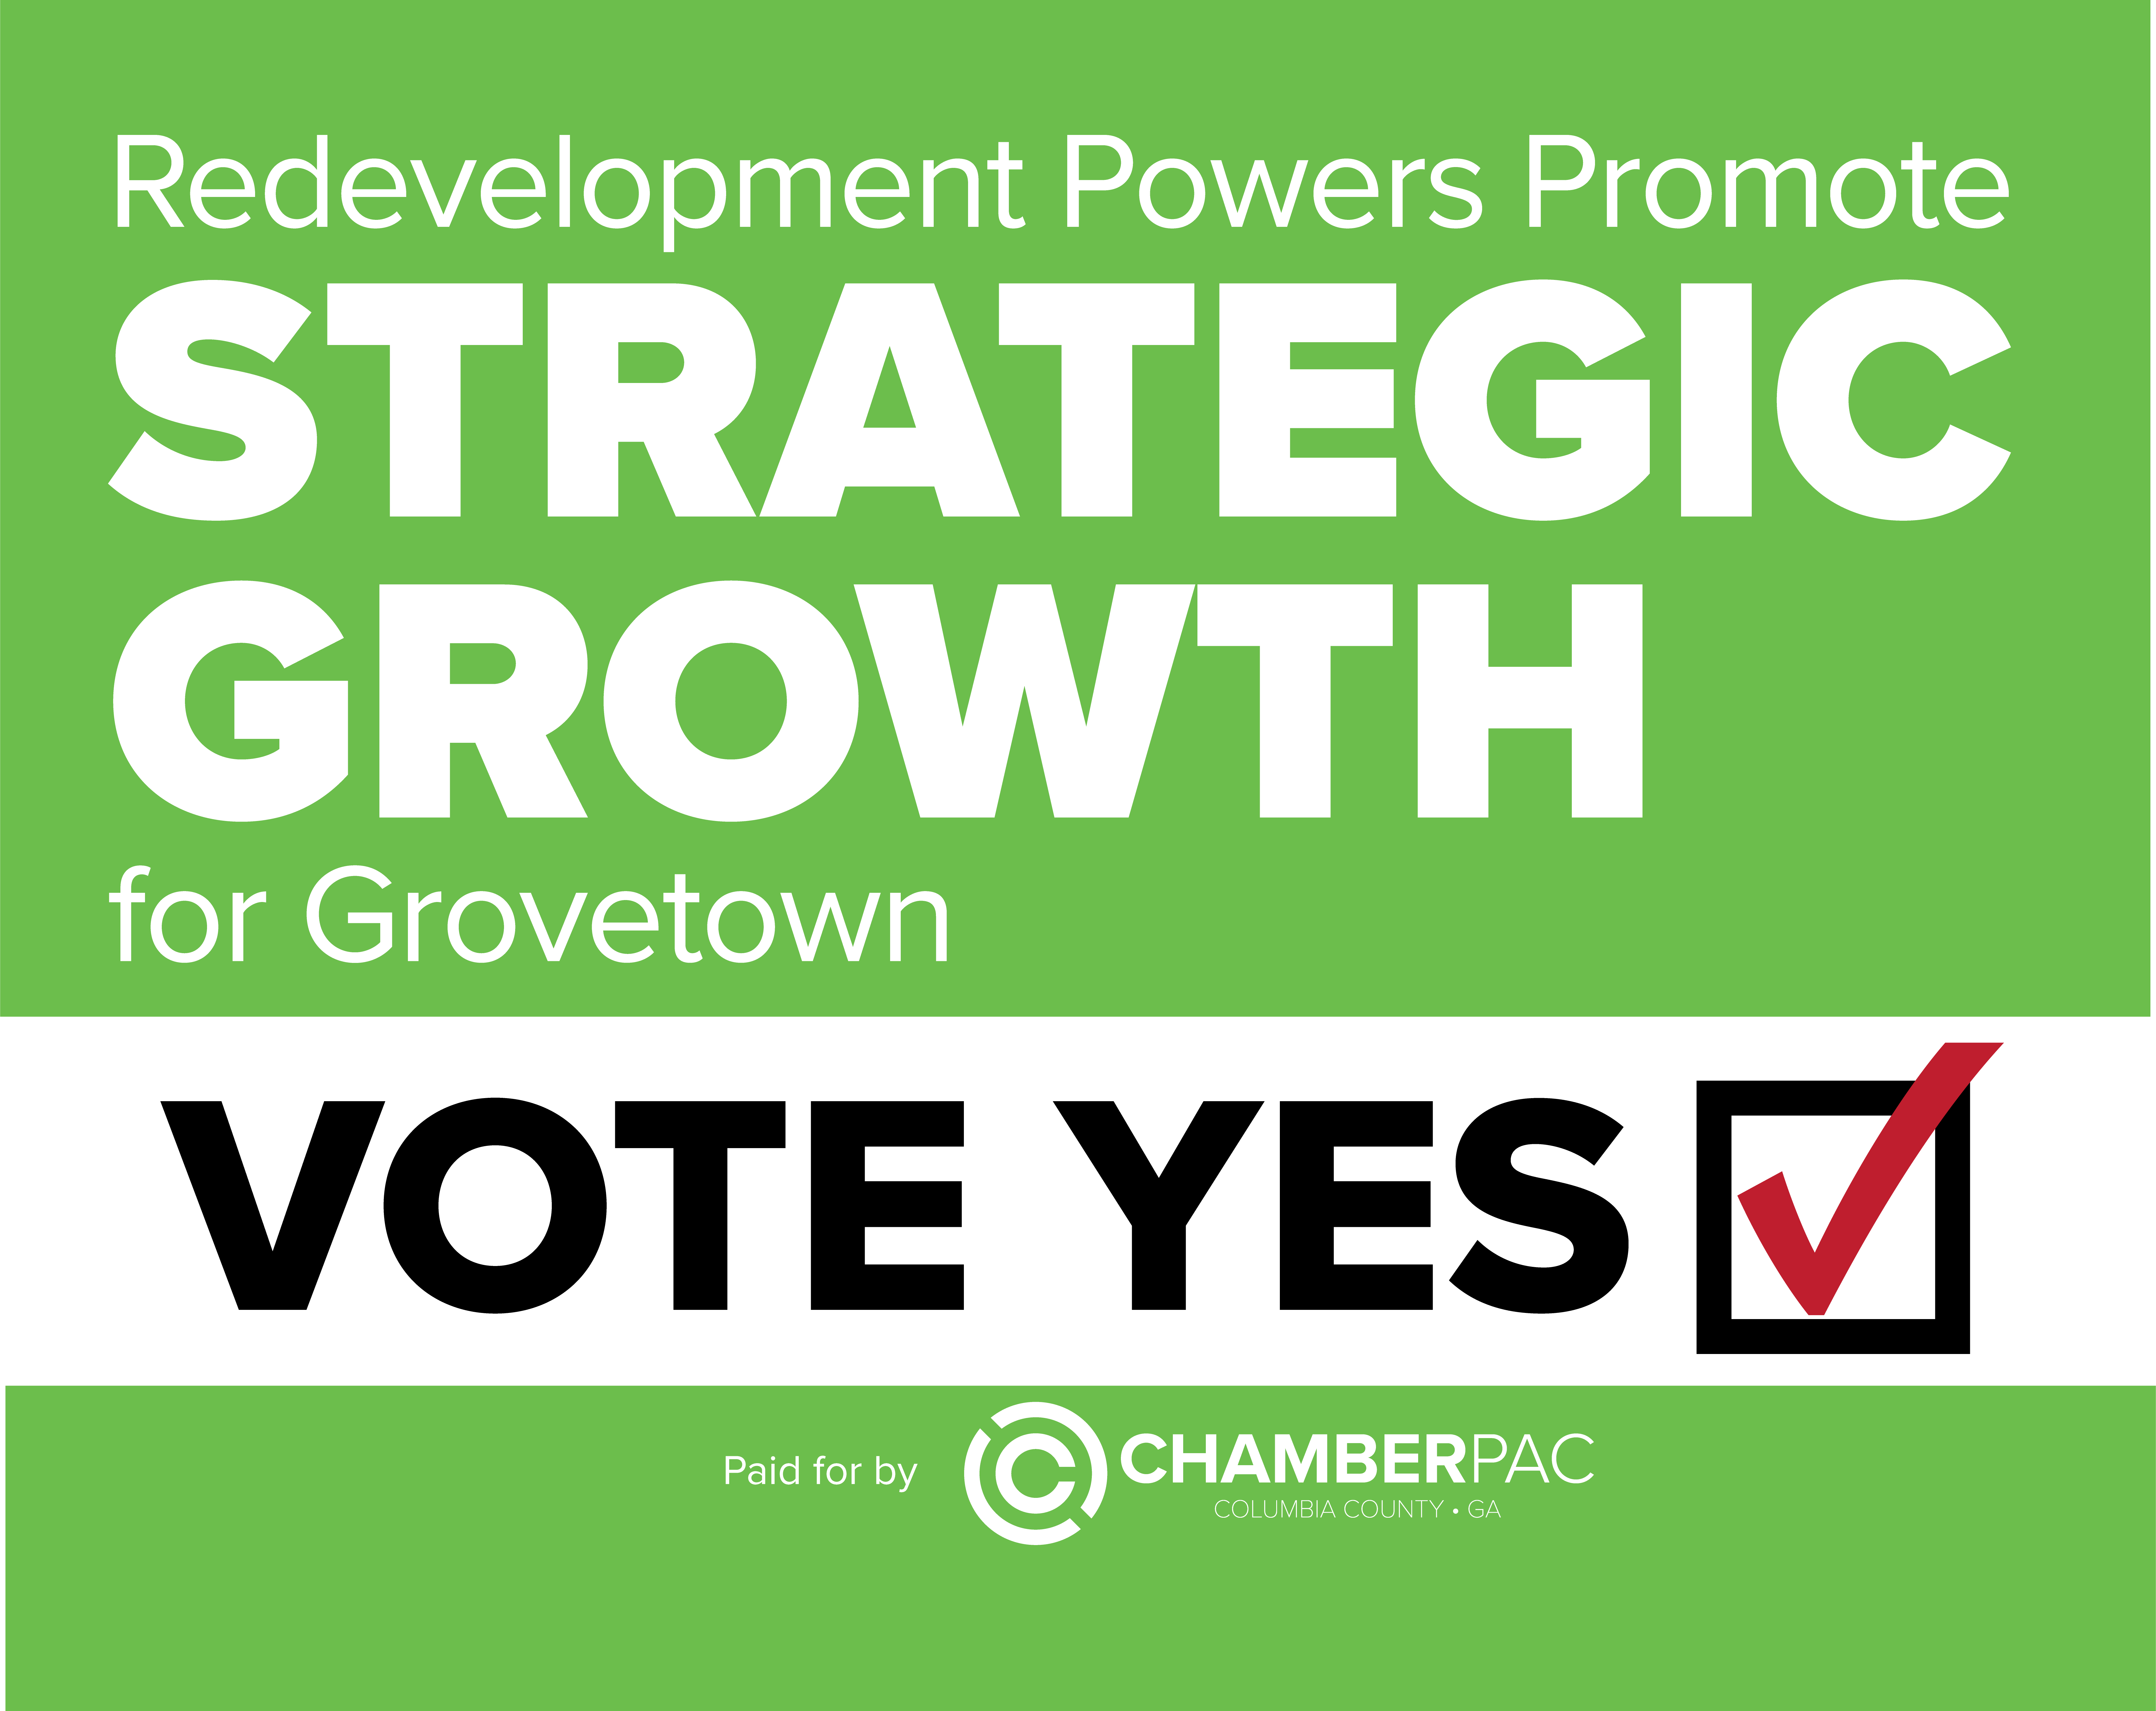 Image for ChamberPAC: Vote YES on Redevelopment Powers for Grovetown